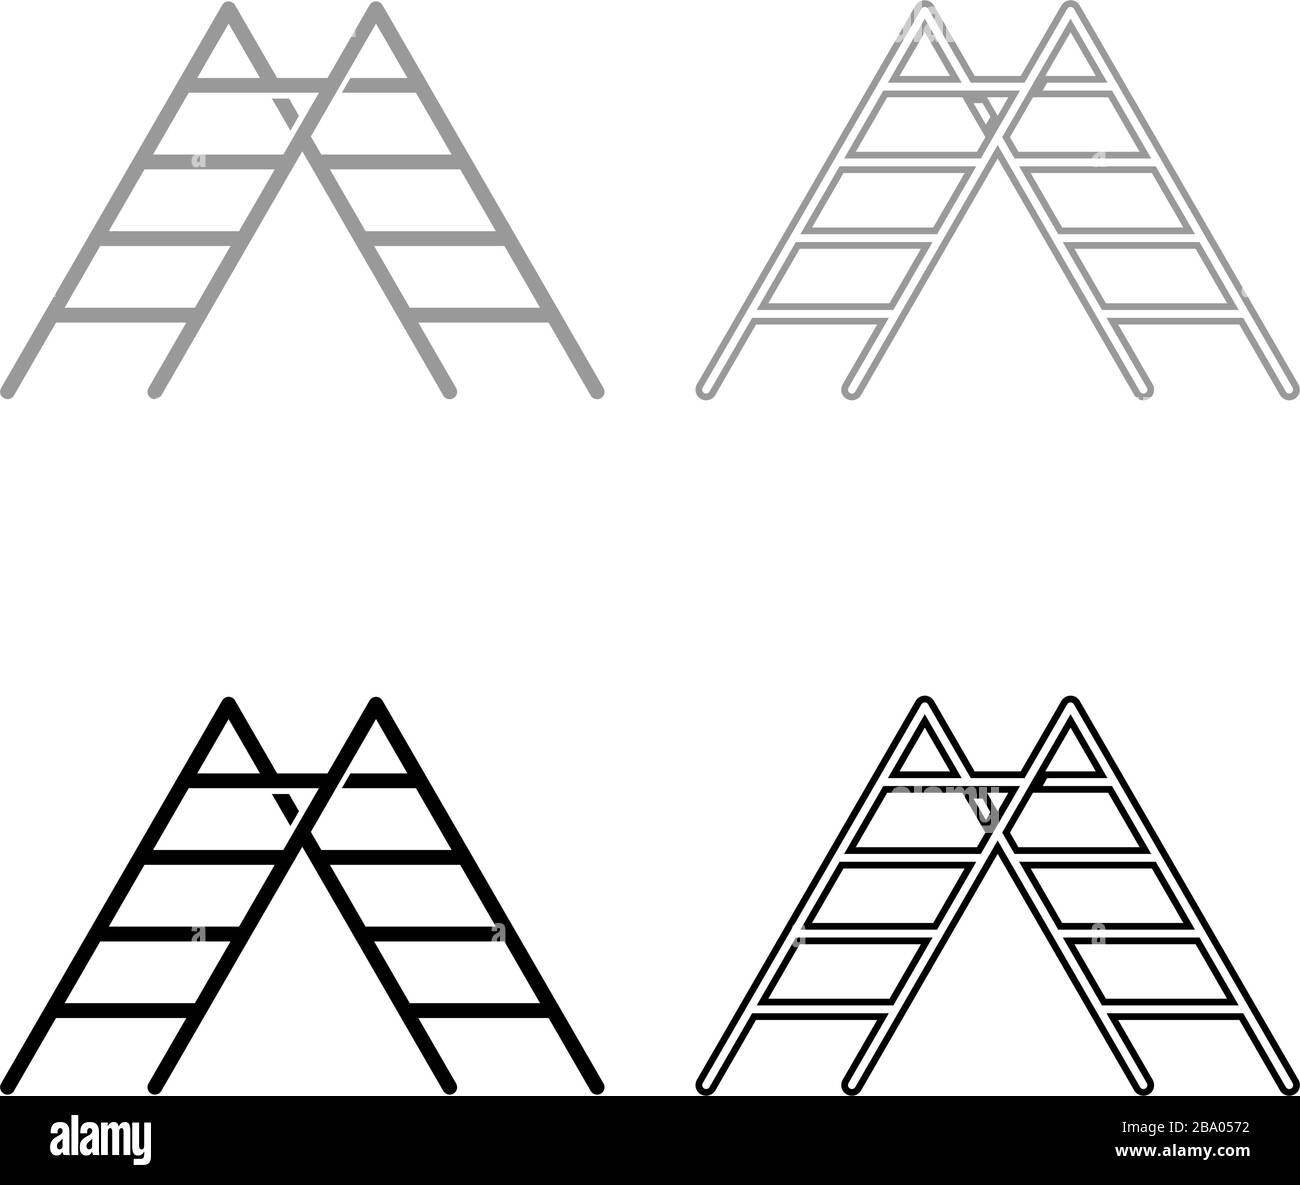 Step ladder icon outline set black grey color vector illustration flat style simple image Stock Vector